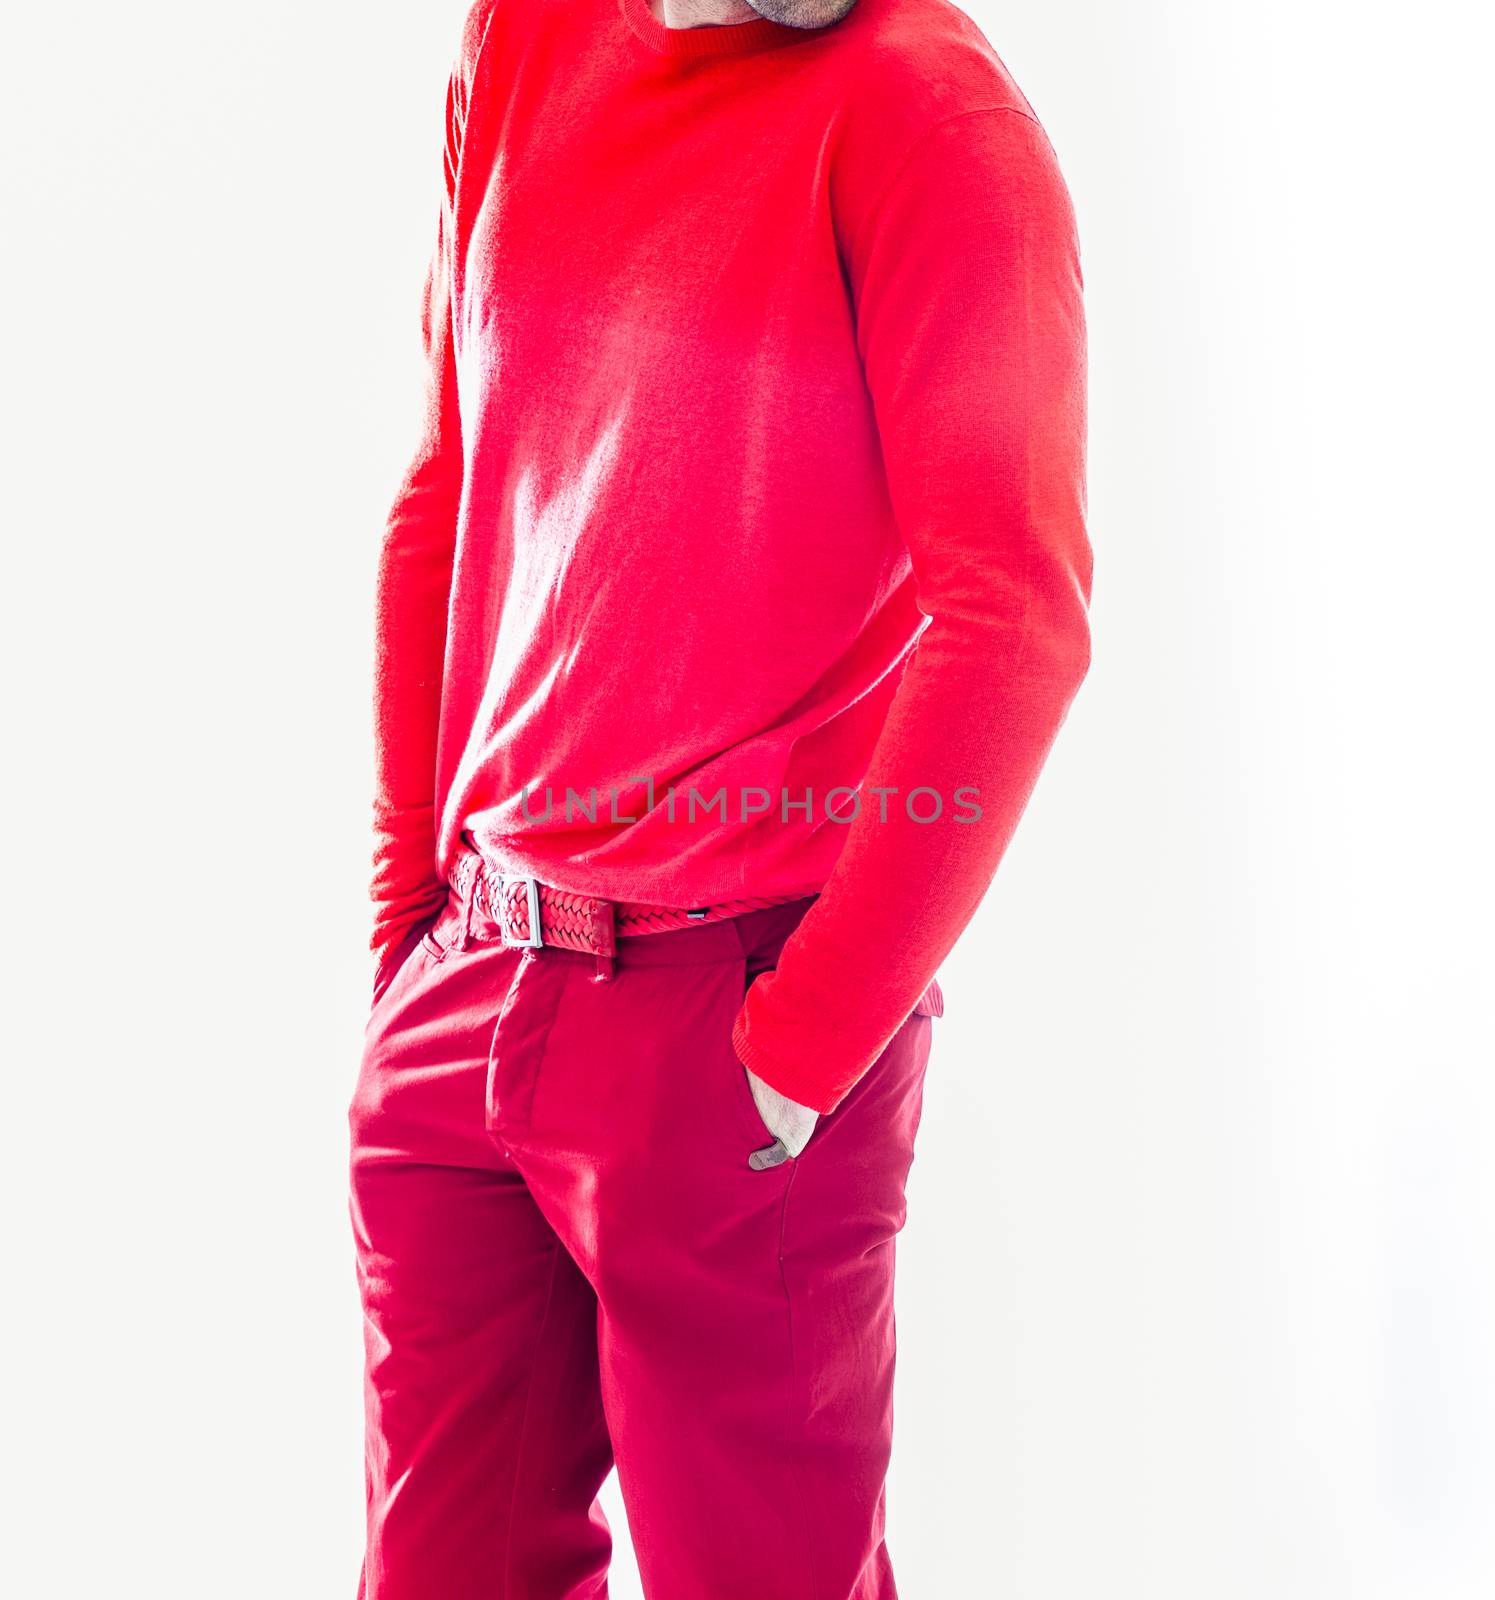 Elegant young handsome man in red clothing. Studio fashion portrait.